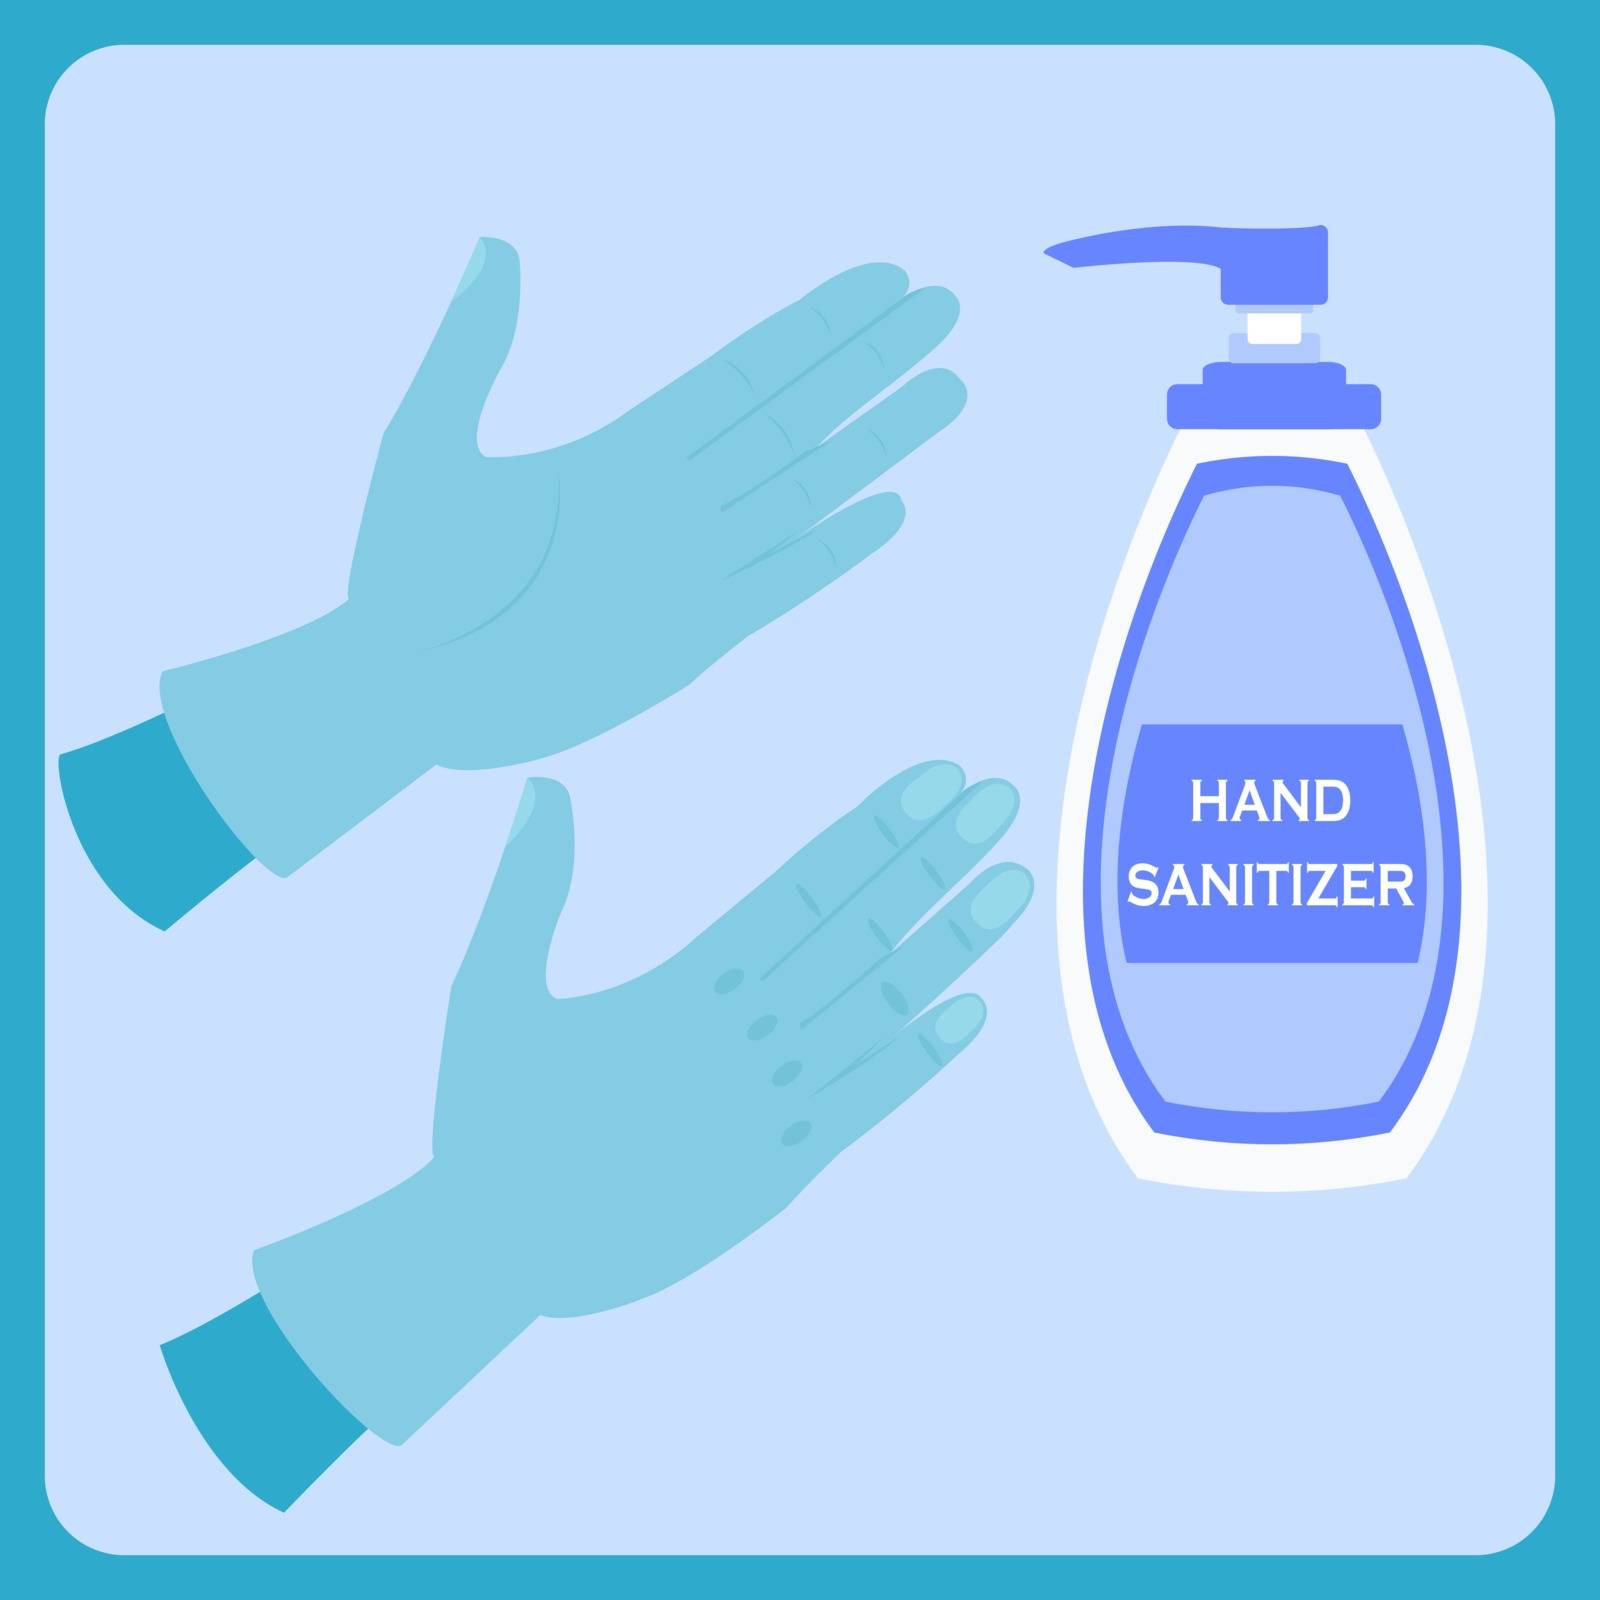 hand gloves and hand sanitizer for banner or sign,symbol of hygiene products by ardeann